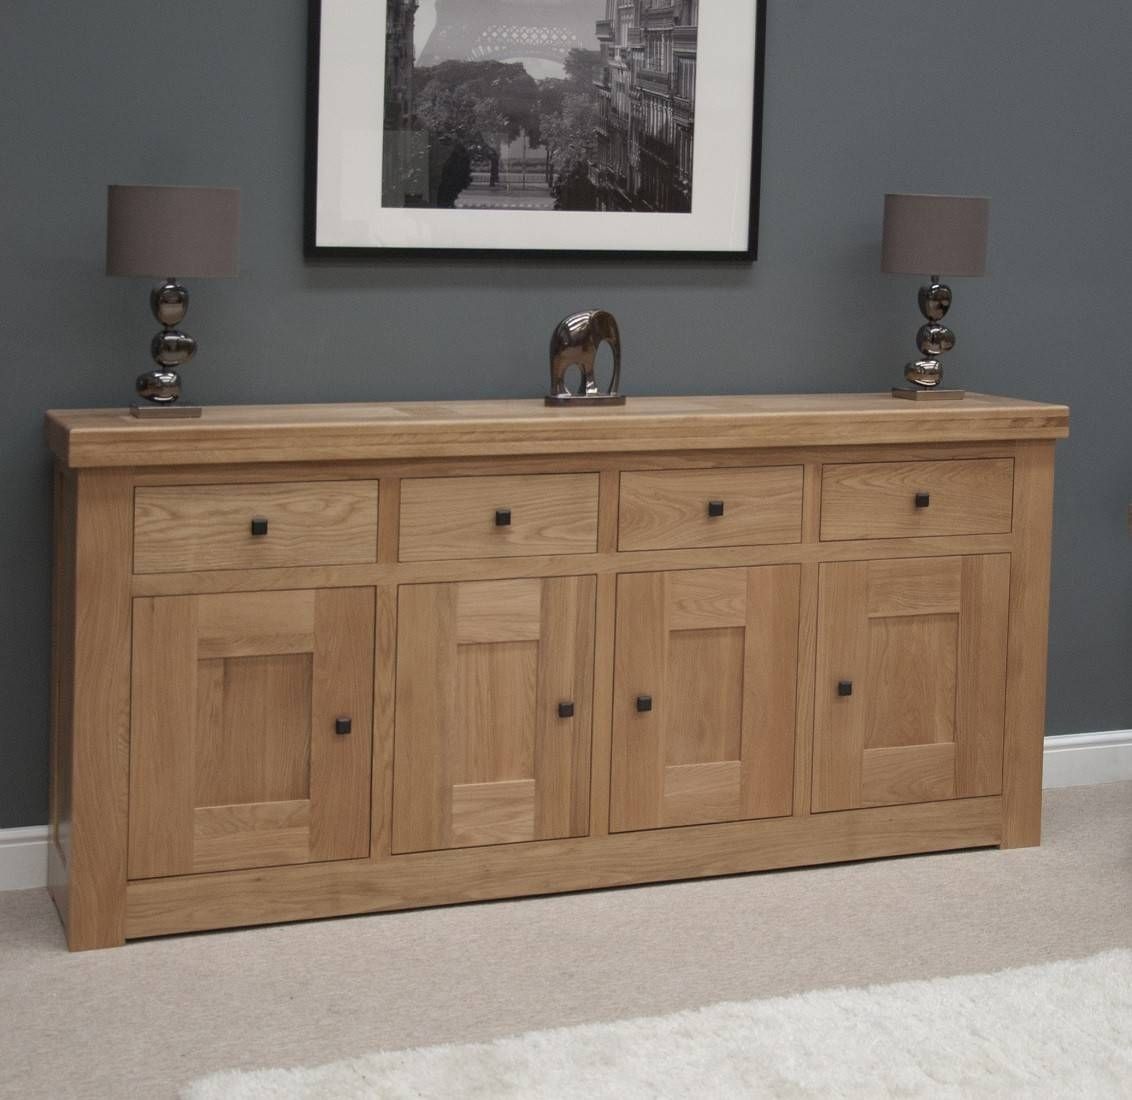 French Bordeaux Oak Extra Large 4 Door Sideboard | Oak Furniture Uk In Best And Newest Wooden Sideboard Furniture (Photo 3 of 15)